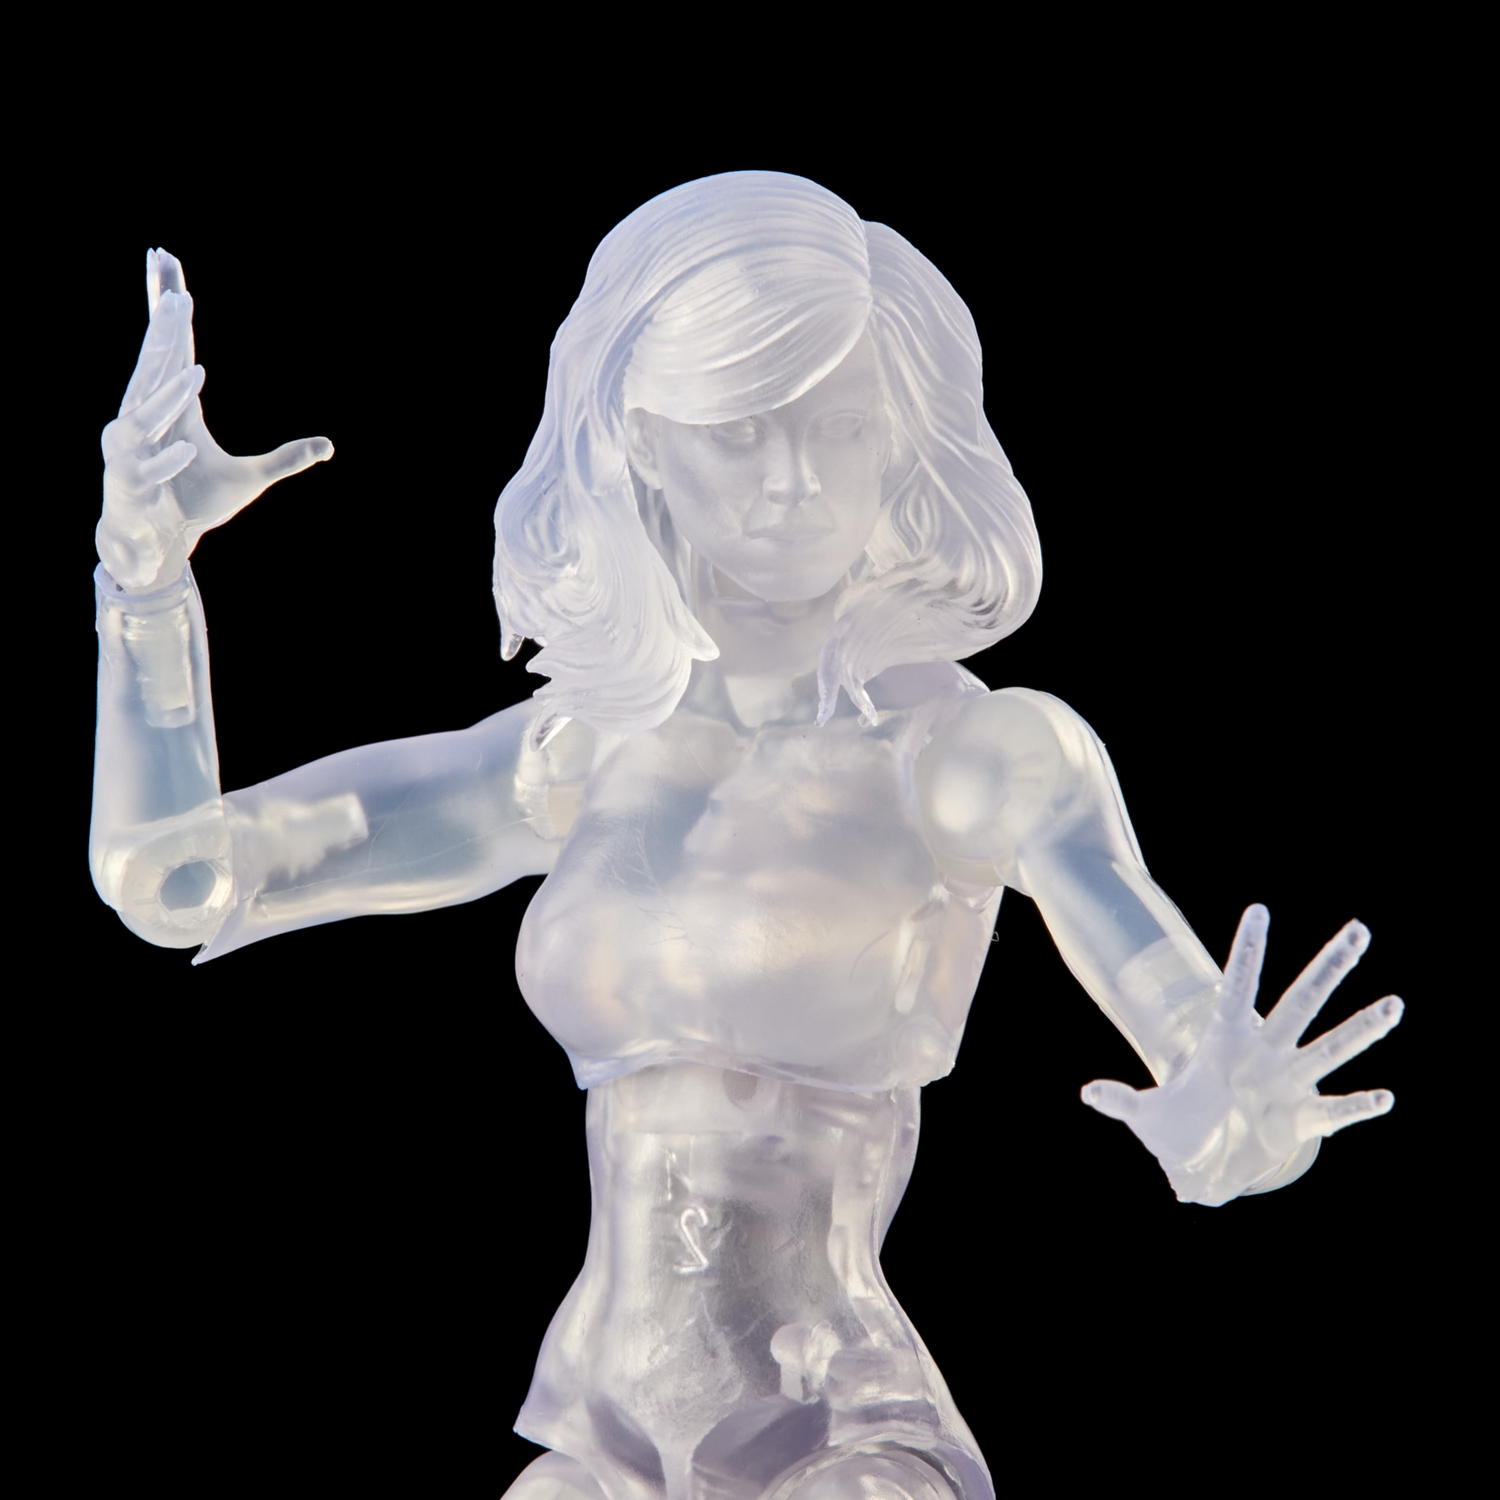 MARVEL LEGENDS SERIES 6-INCH RETRO FANTASTIC FOUR MARVEL’S INVISIBLE WOMAN Figure (Clear)_oop 6.jpg